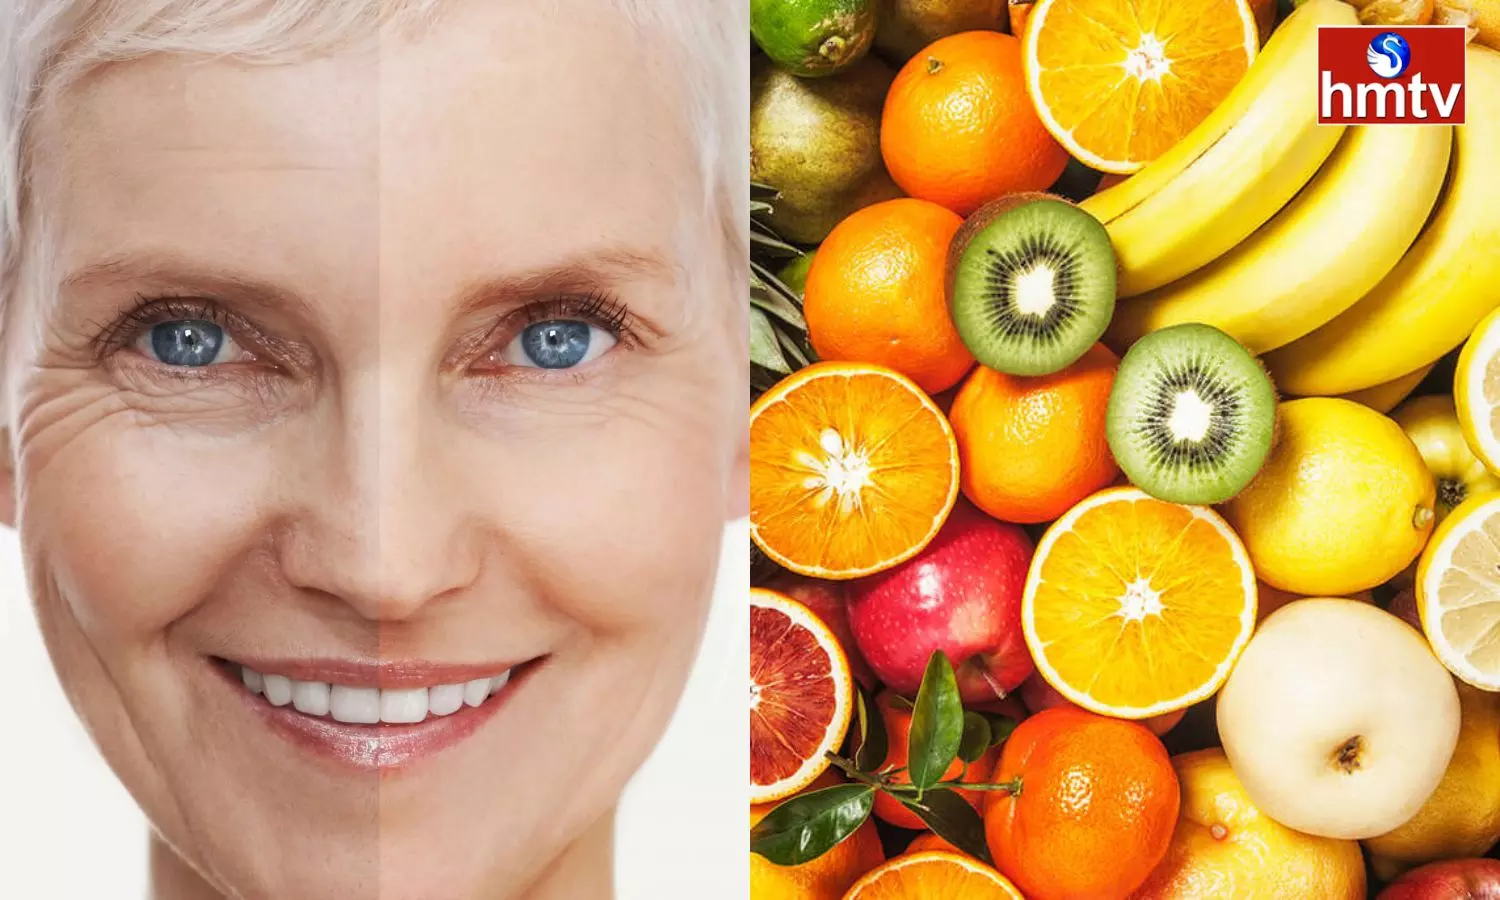 If You Start Eating These Fruits The Wrinkles On The Face Will Disappear Within A Week